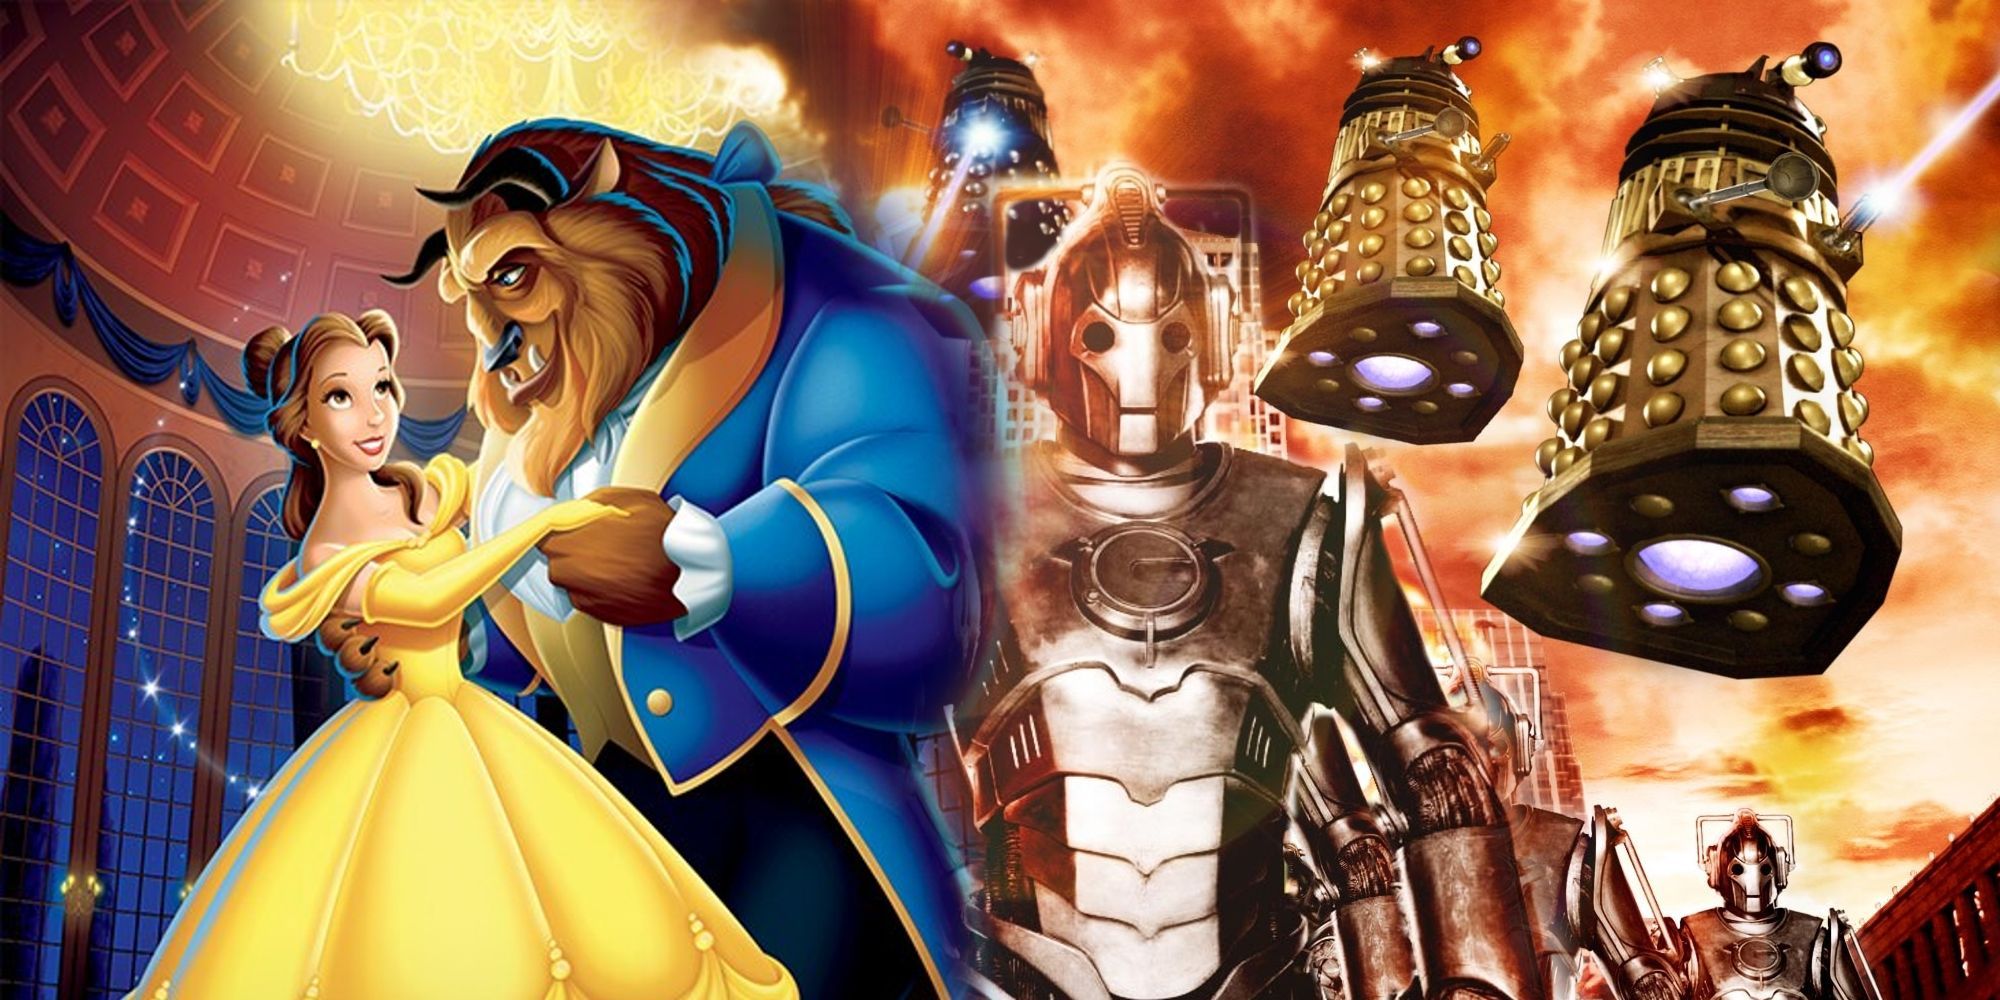 Beauty and the Beast and Dalek's and Cybermen from Doctor Who